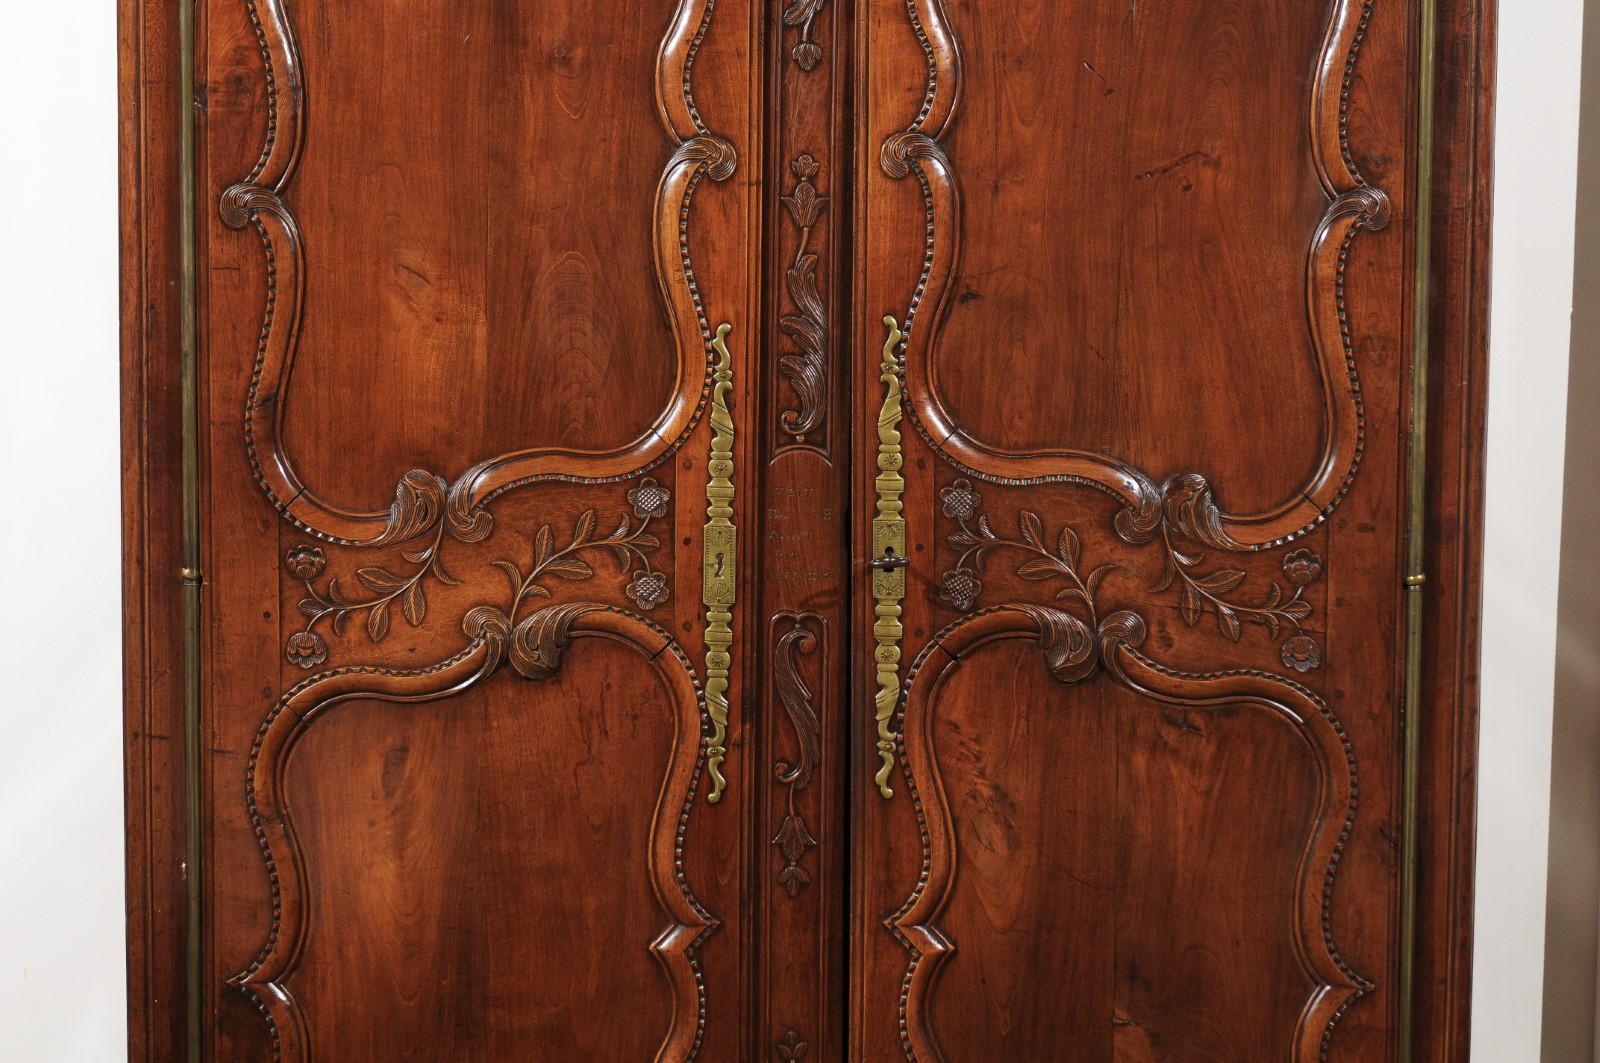 A French early 19th century Bretonne cherry armoire from Rennes with double bonnet top and carved décor. Born in the capital of Brittany during the first quarter of the 19th century, this cherry armoire features a double bonnet top adorned with